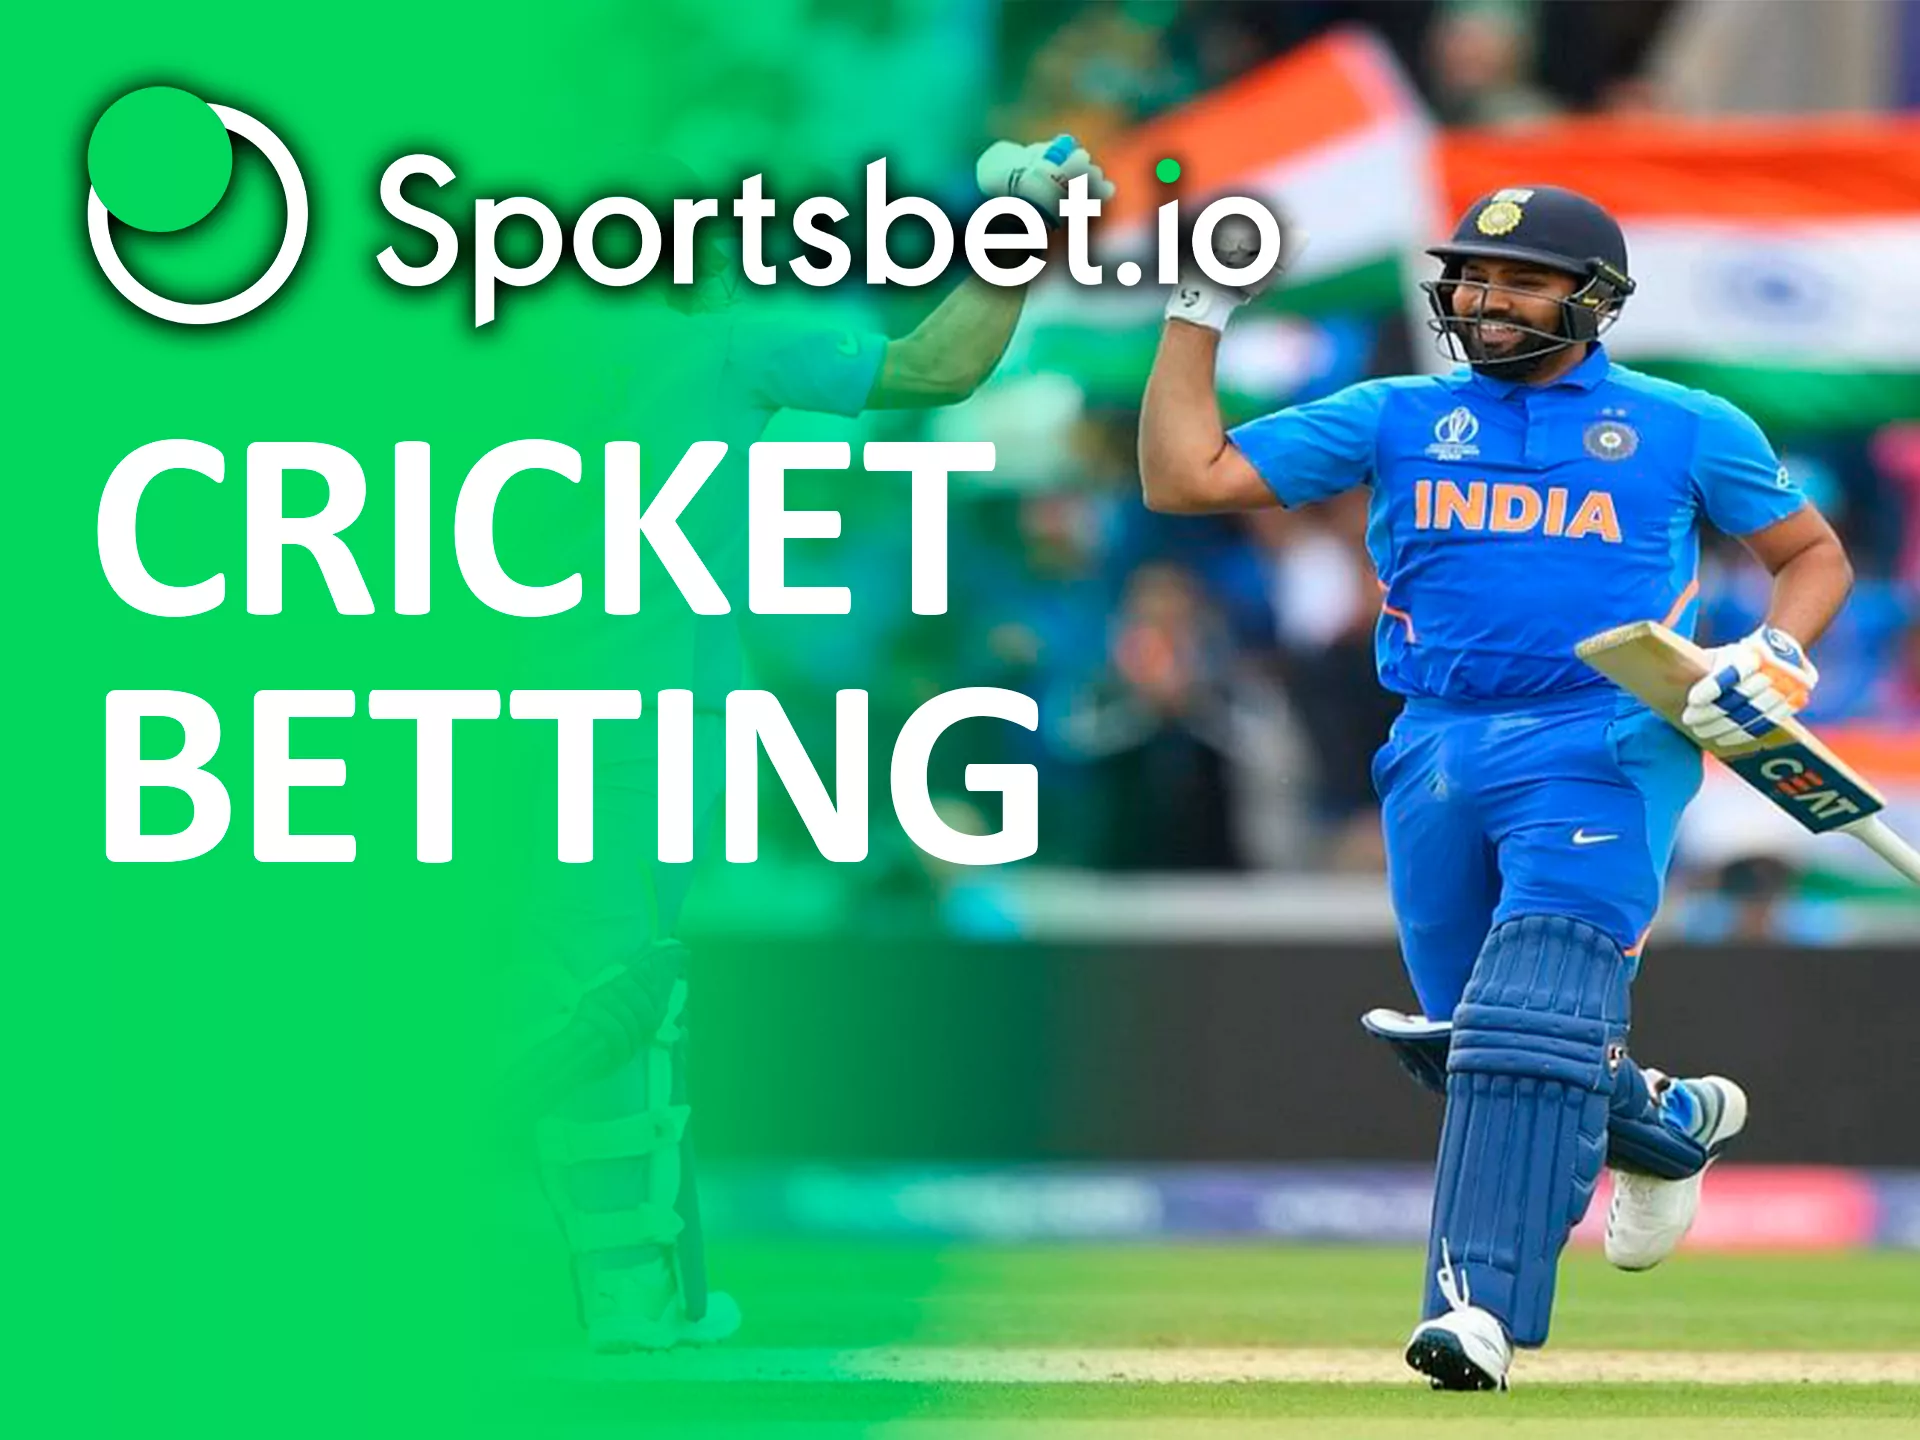 Place bet on IPL matches at Sportsbet io.